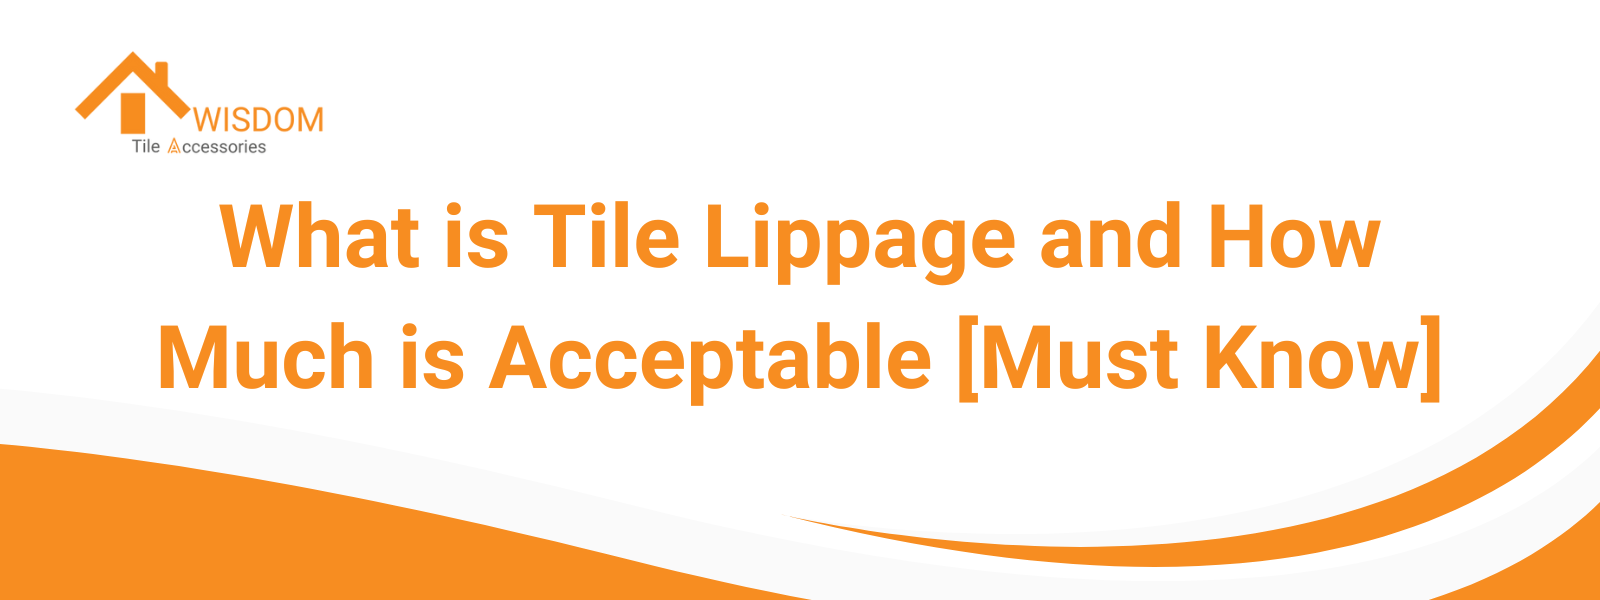 What is Tile Lippage and How Much is Acceptable [Must Know]